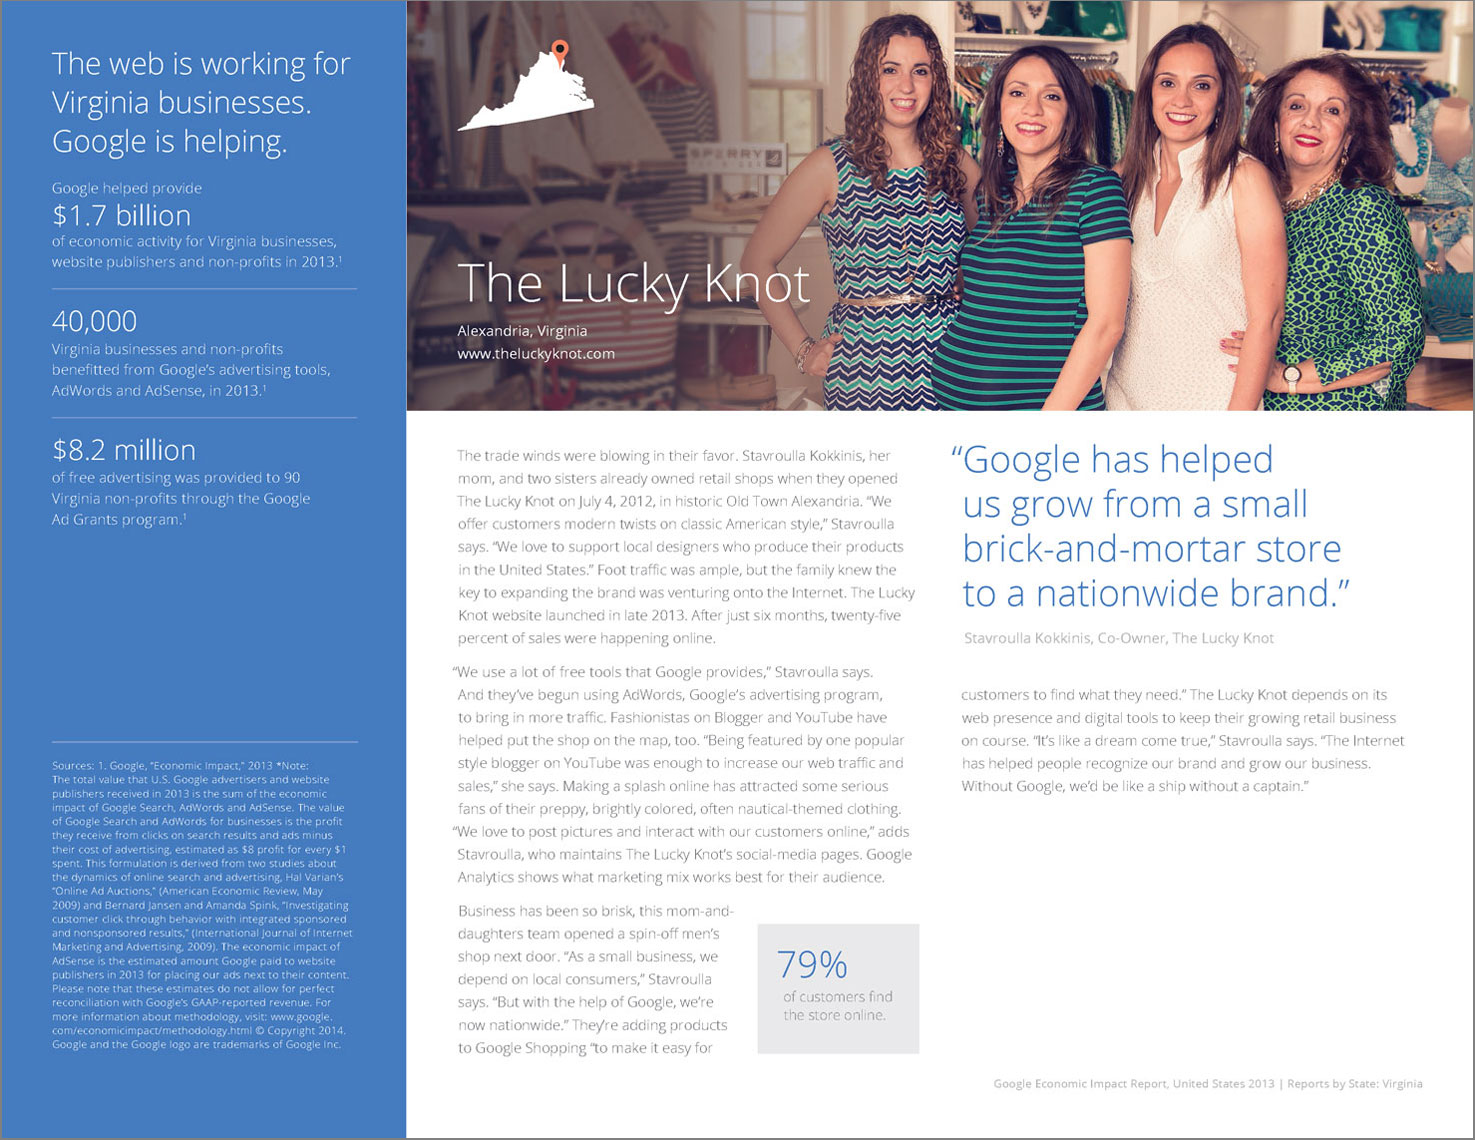 Google Economic Impact Report featuring the Lucky Knot